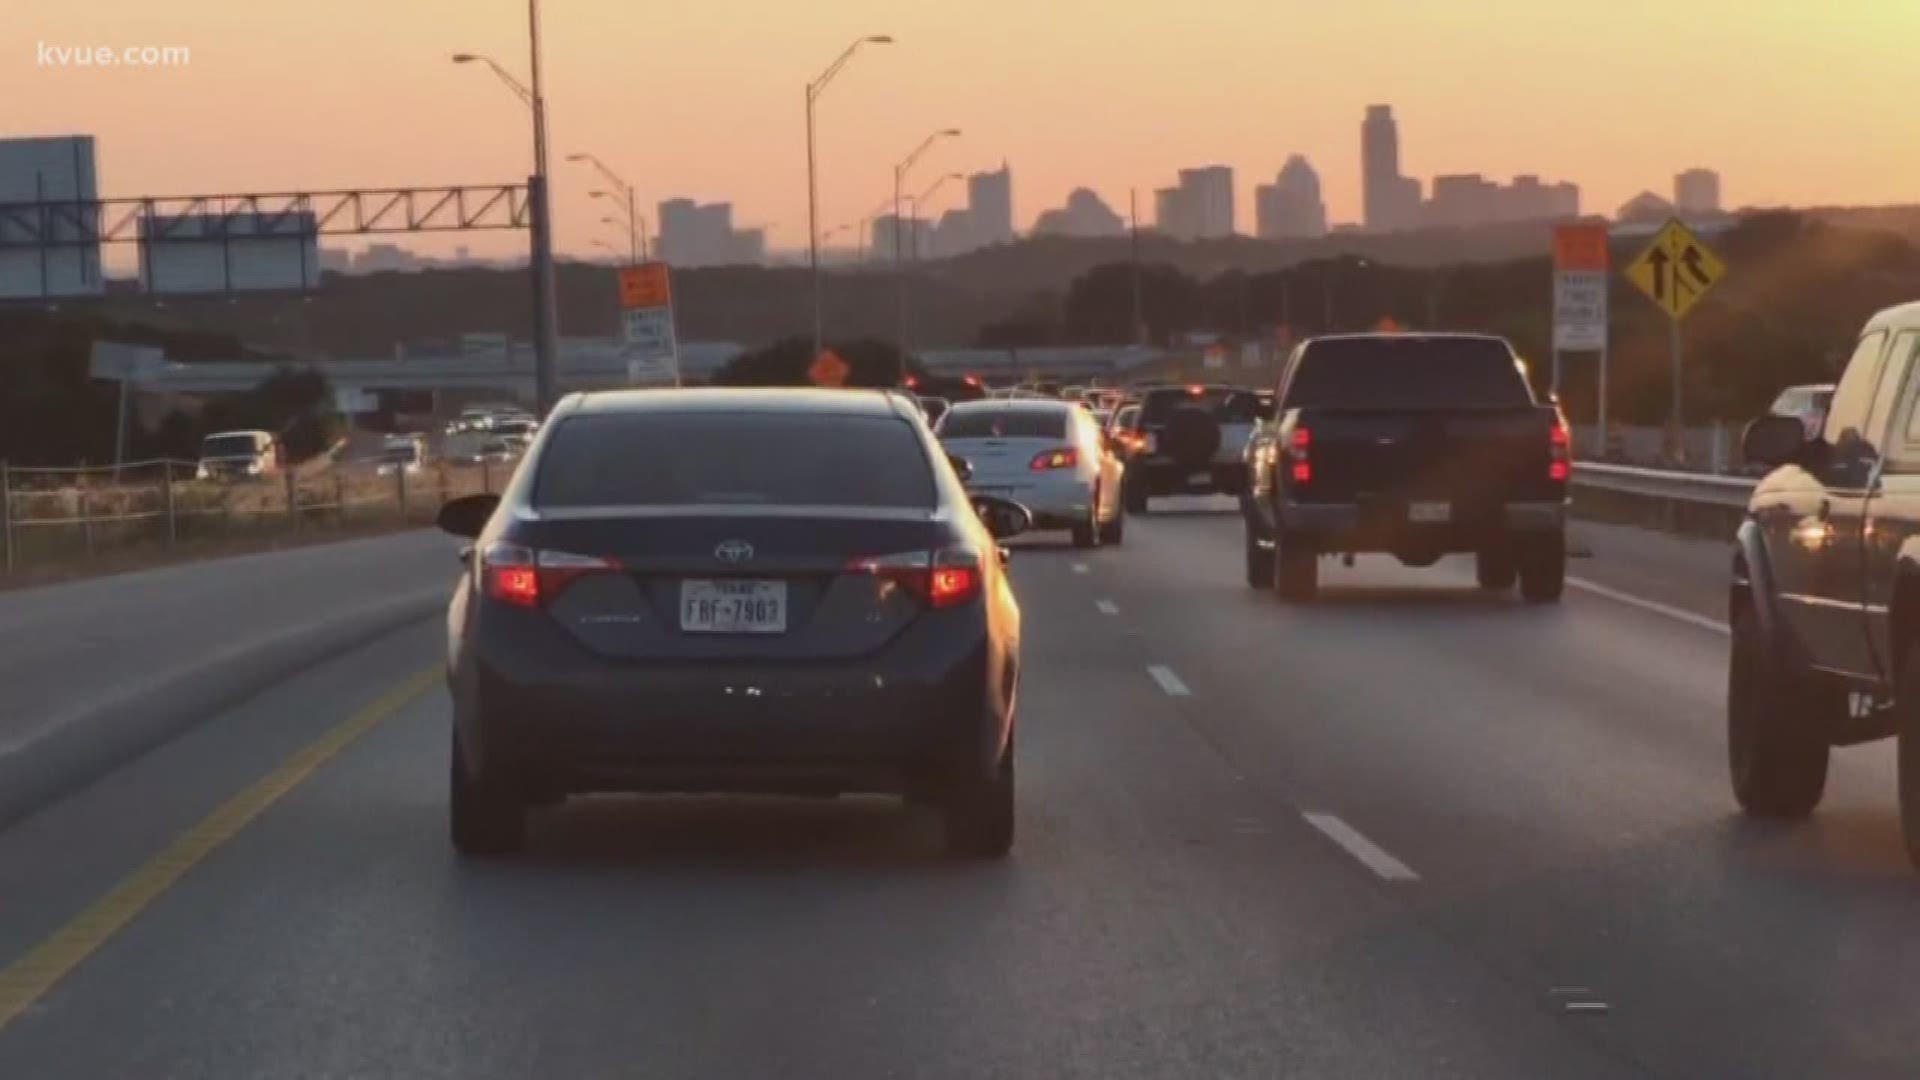 $400M is set to be spent on making your commute less congested in Central Texas,